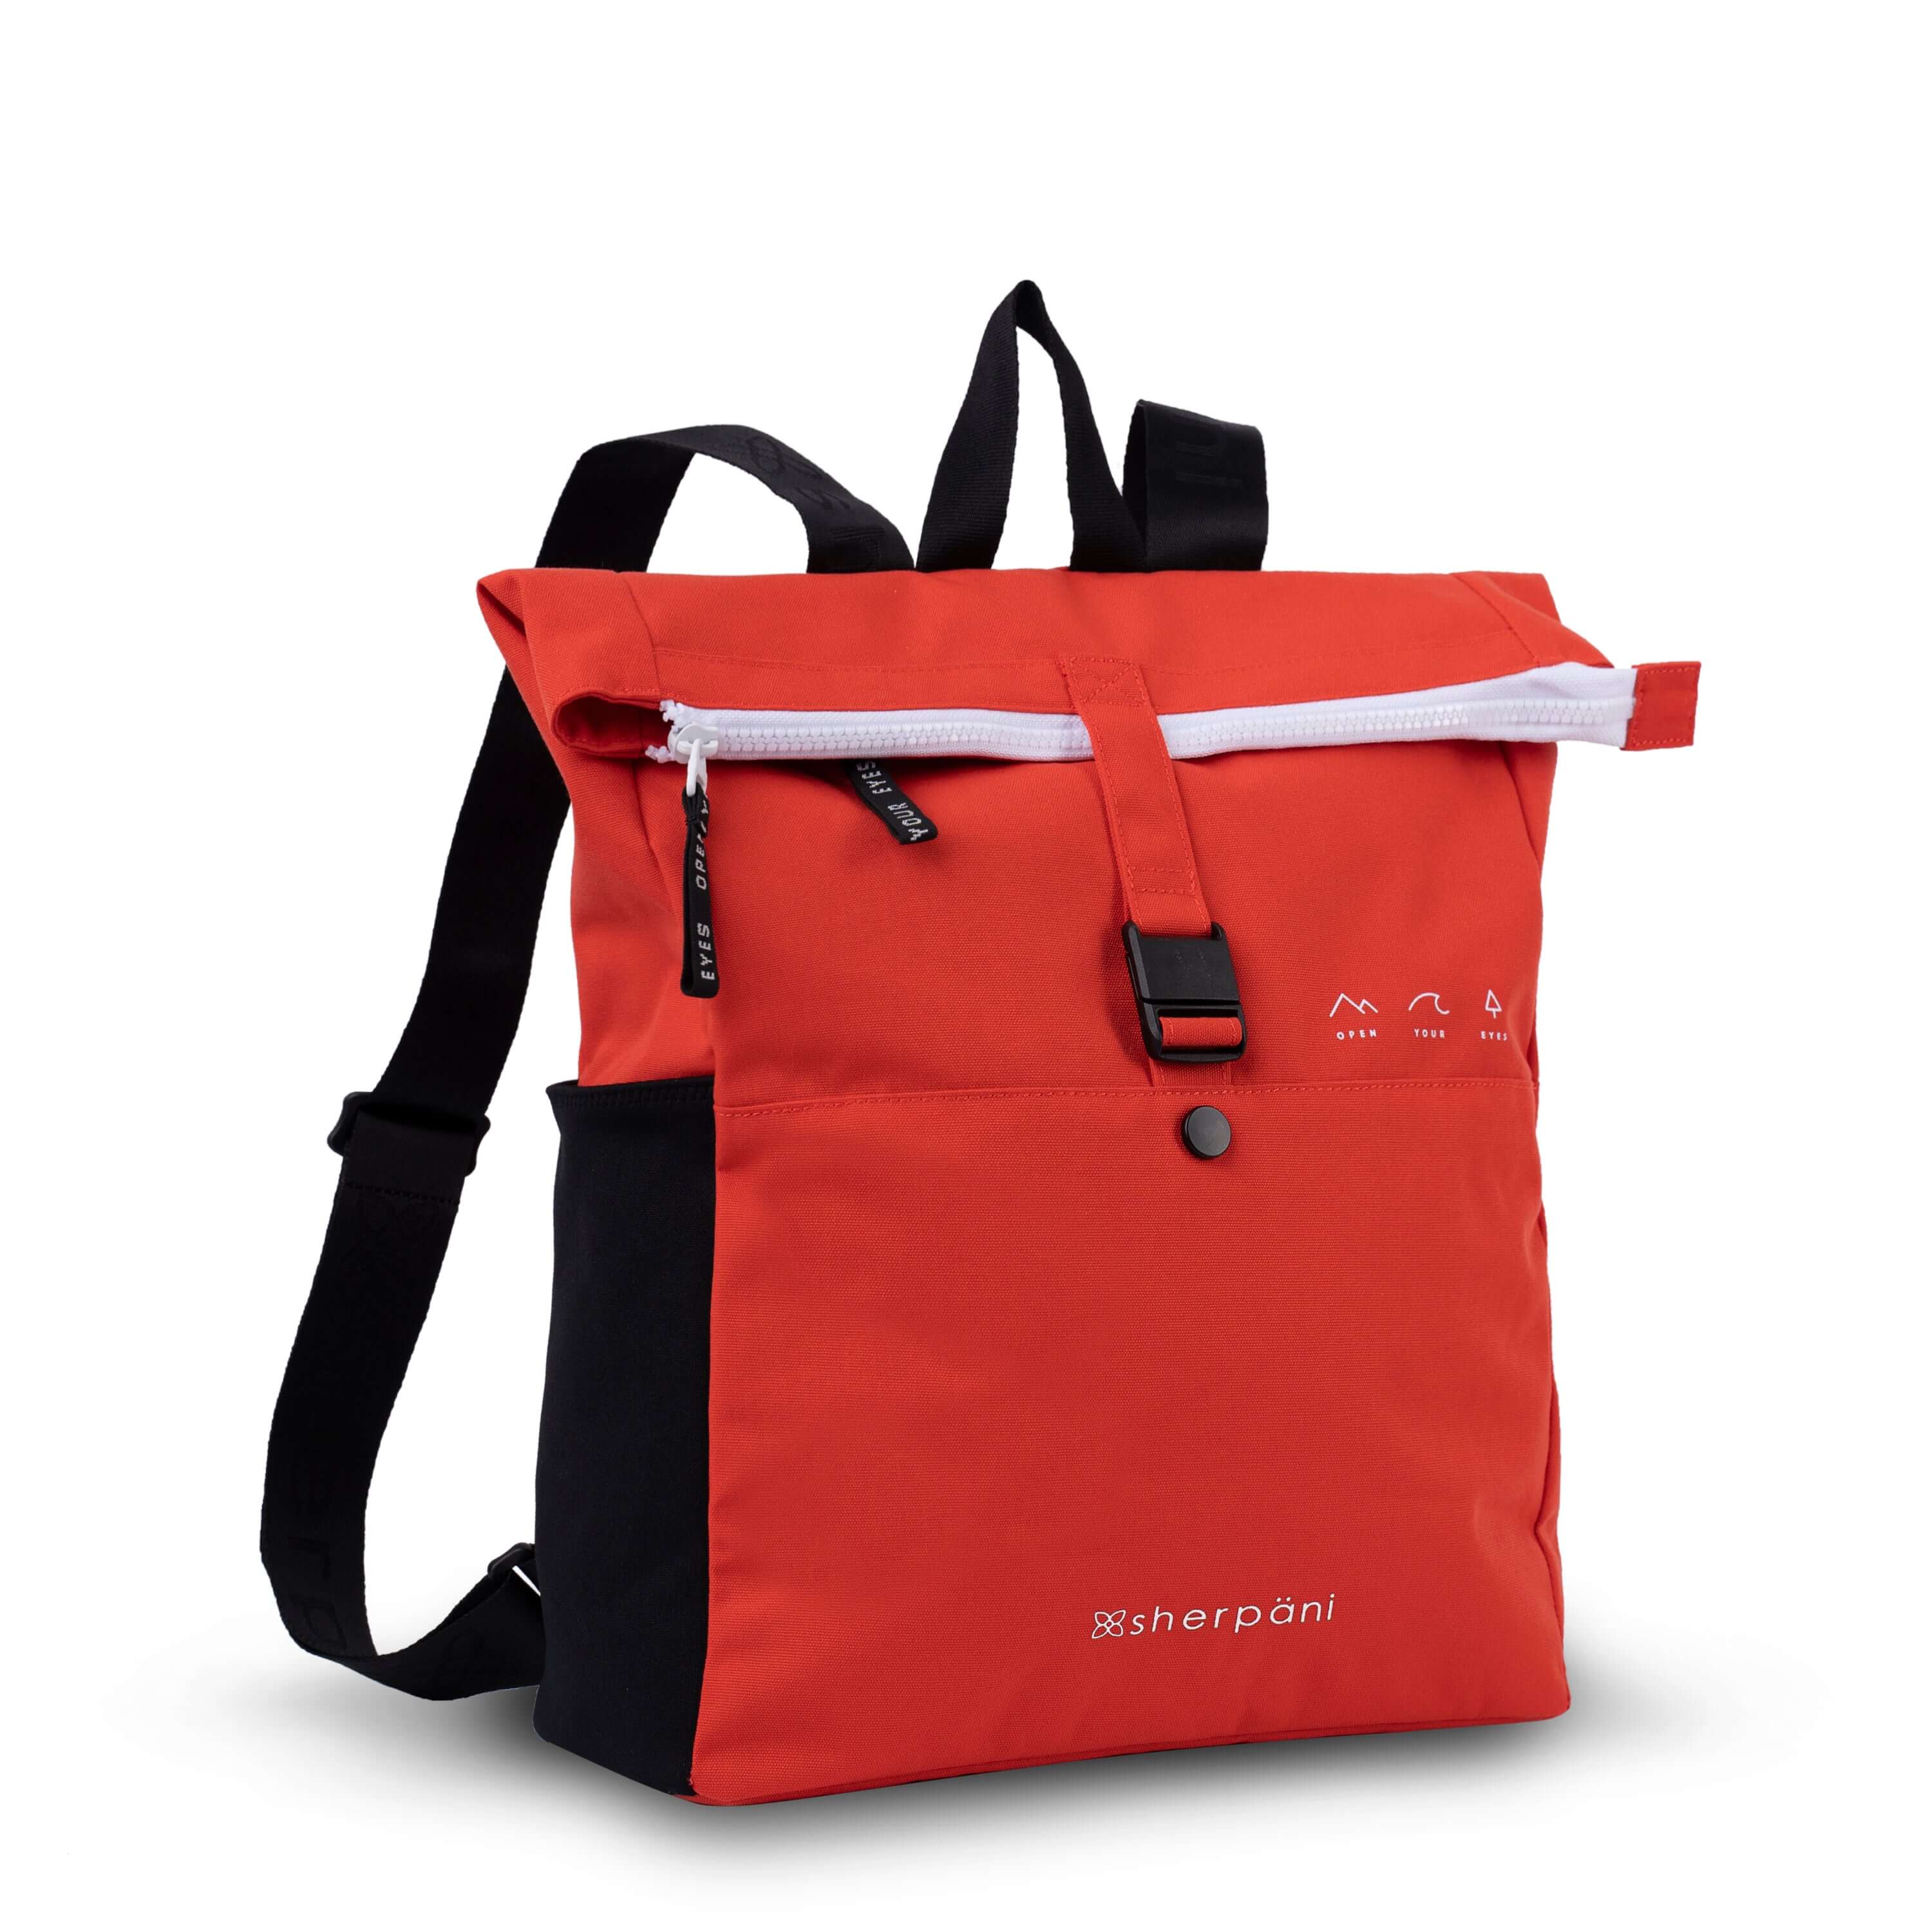 Angled front view of Sherpani backpack, the Miyako in Poppy. The bag is red in color with black accents. It features a magnetic buckle closure, adjustable backpack straps and an external water bottle holder. On the right side are small white graphics that depict mountains, a wave and a pine tree above white text that reads "Open Your Eyes."